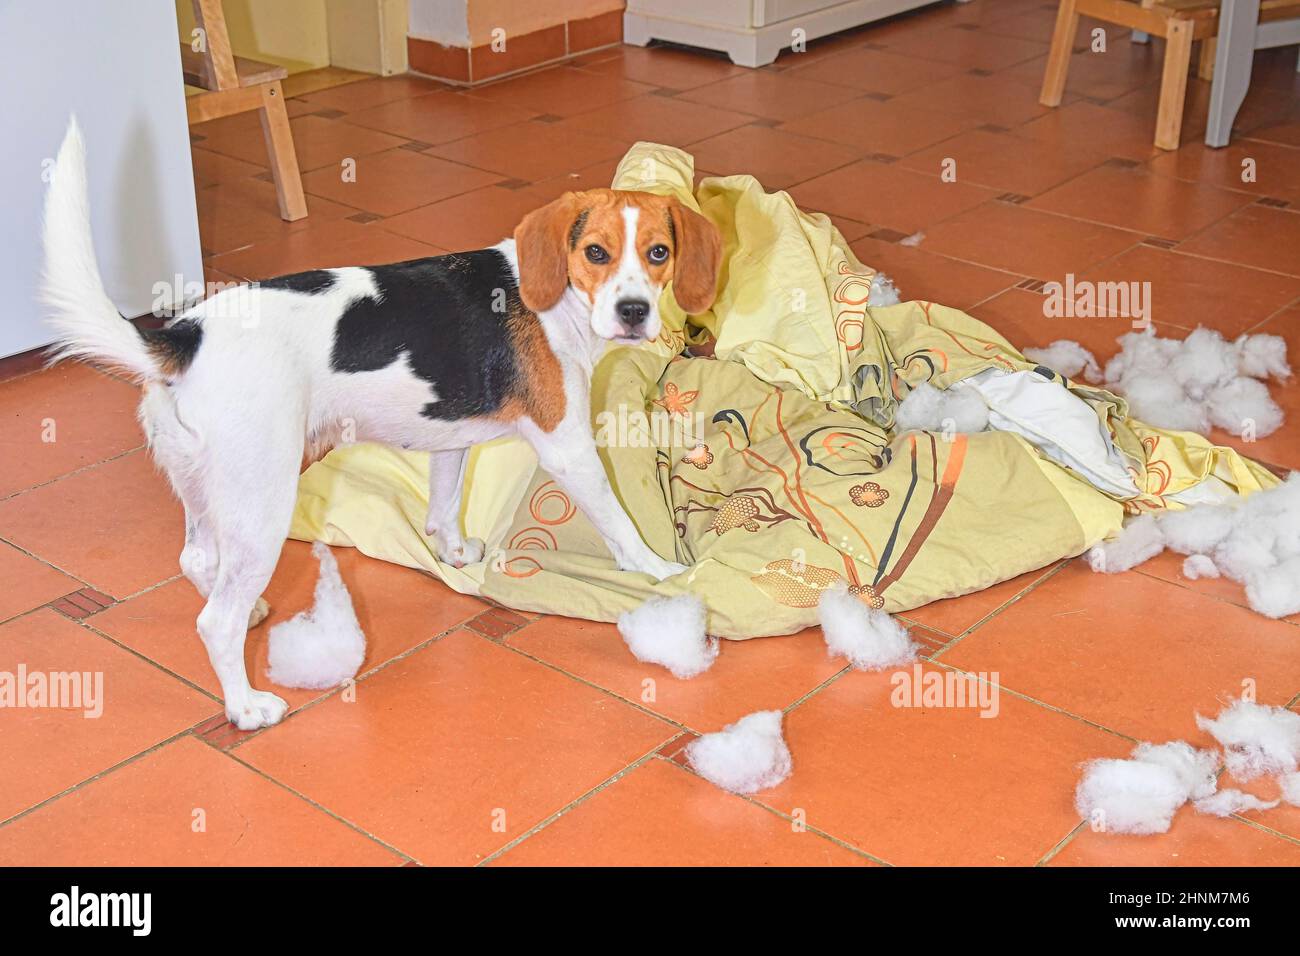 Naughty dog . Beagle dog in the middle of mess in the kitchen. A tiny beagle dog chews bedlinen. Naughty begle puppy dog looking sorrowful that she has just destroyed Stock Photo